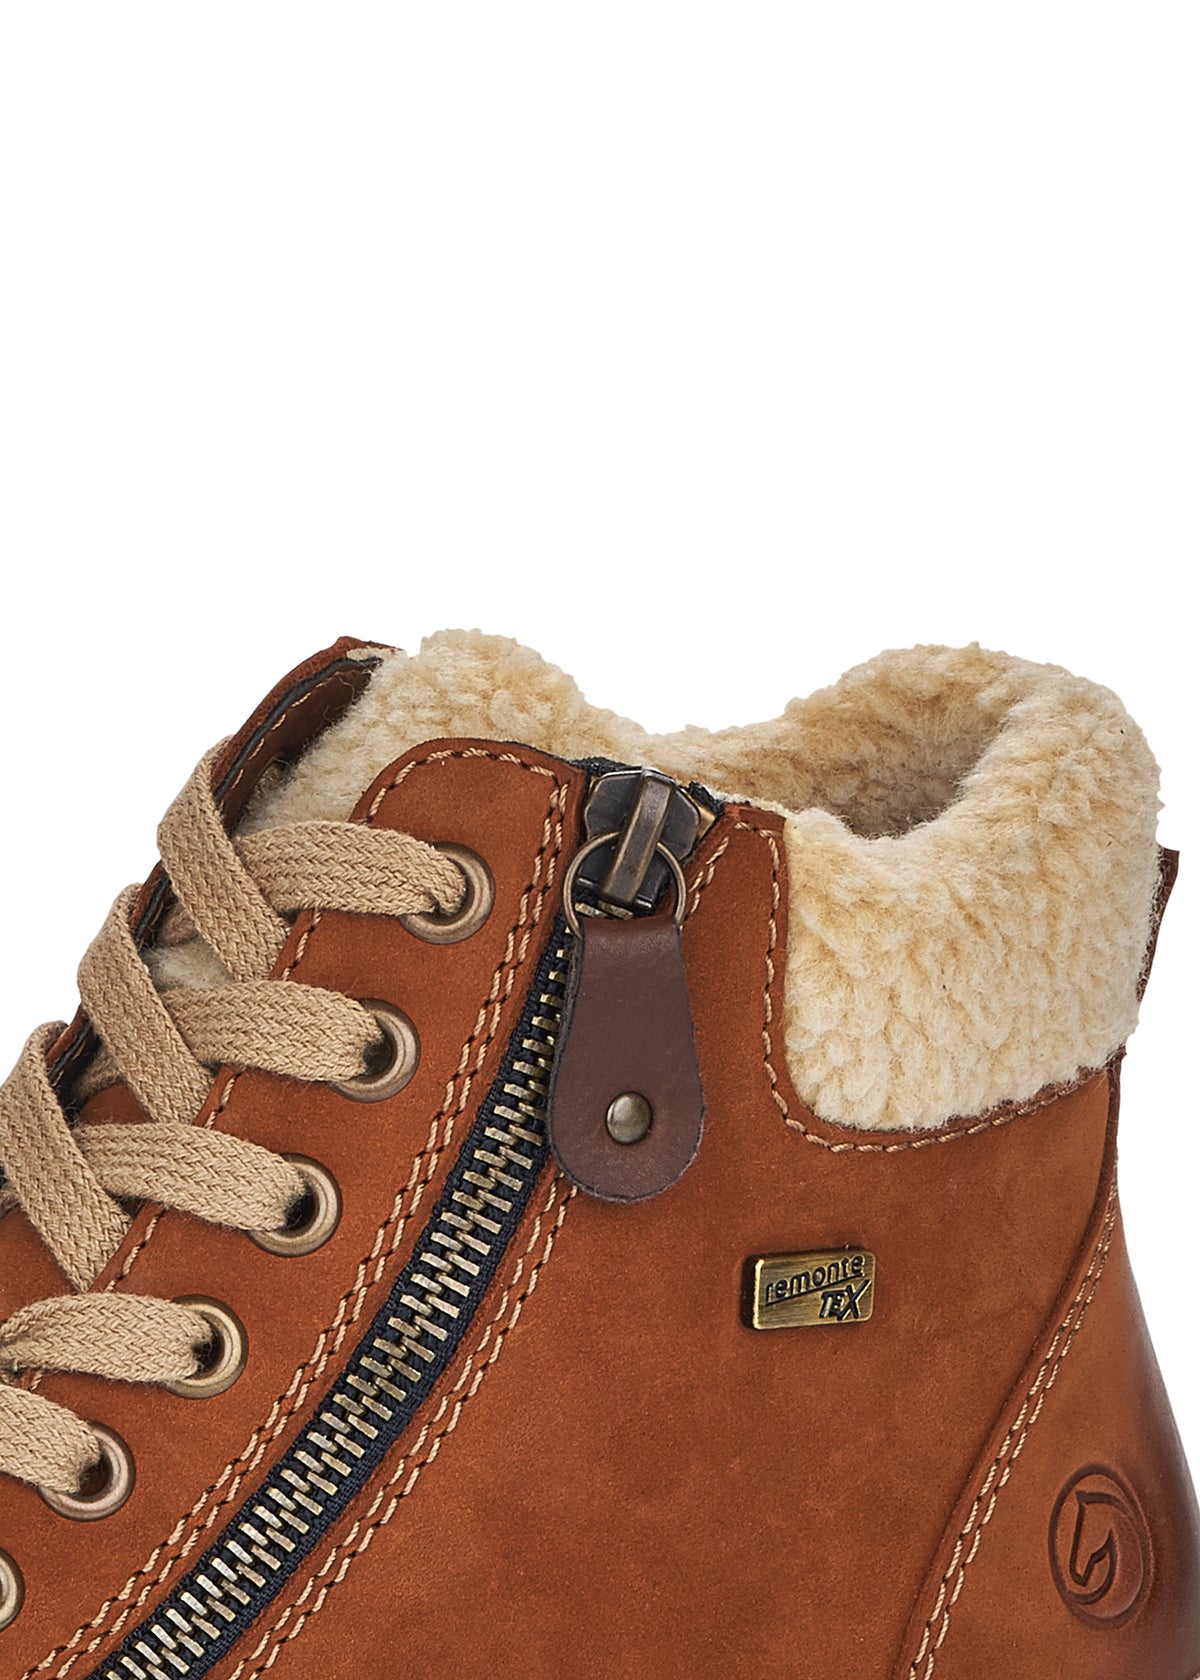 Ankle boots with fur trim - brown, Remonte-TEX